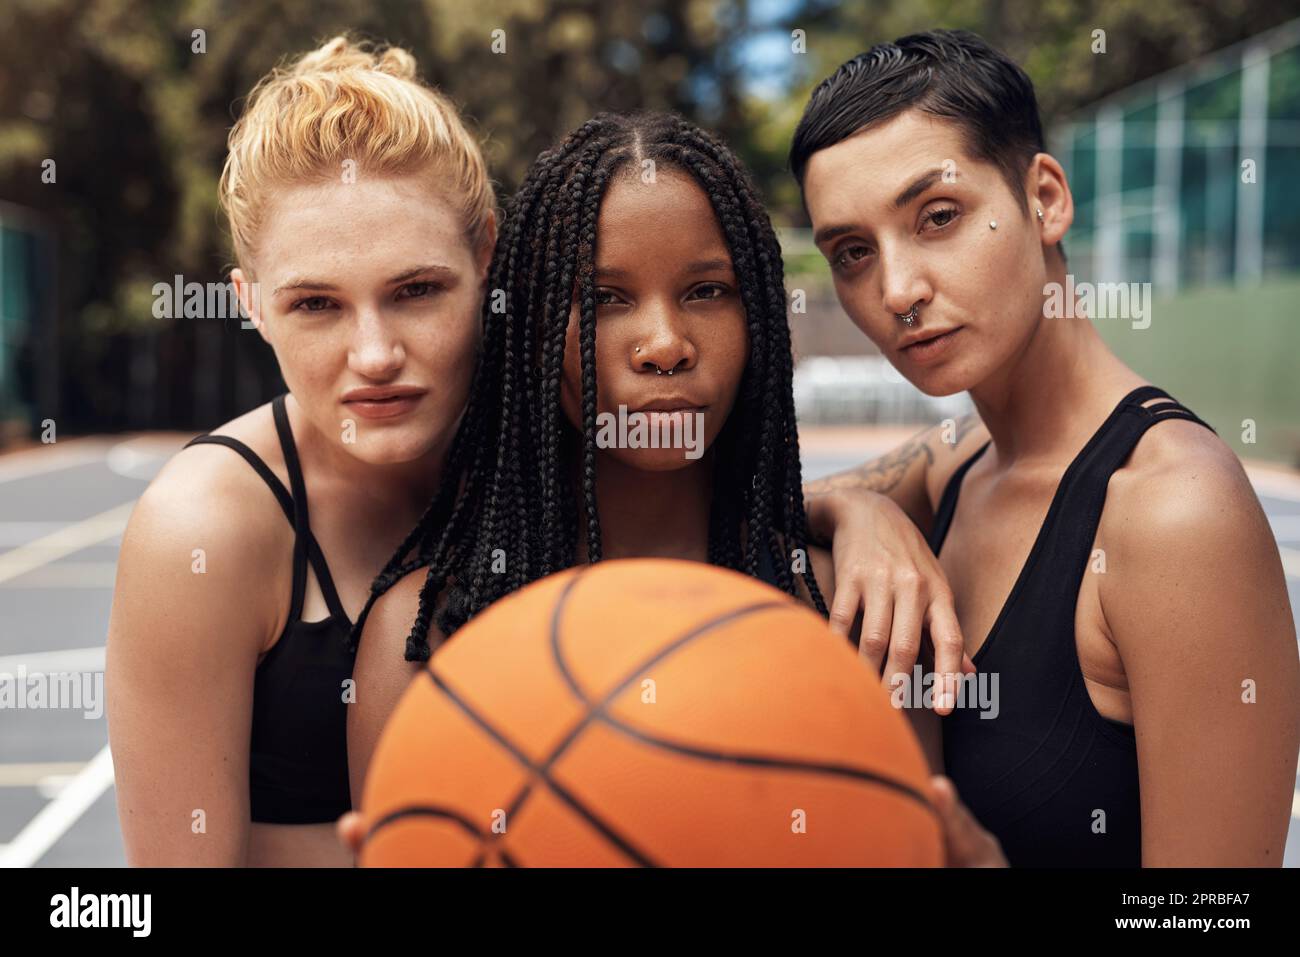 Staying focused on the game. Portrait of a group of sporty young women standing together on a sports court. Stock Photo